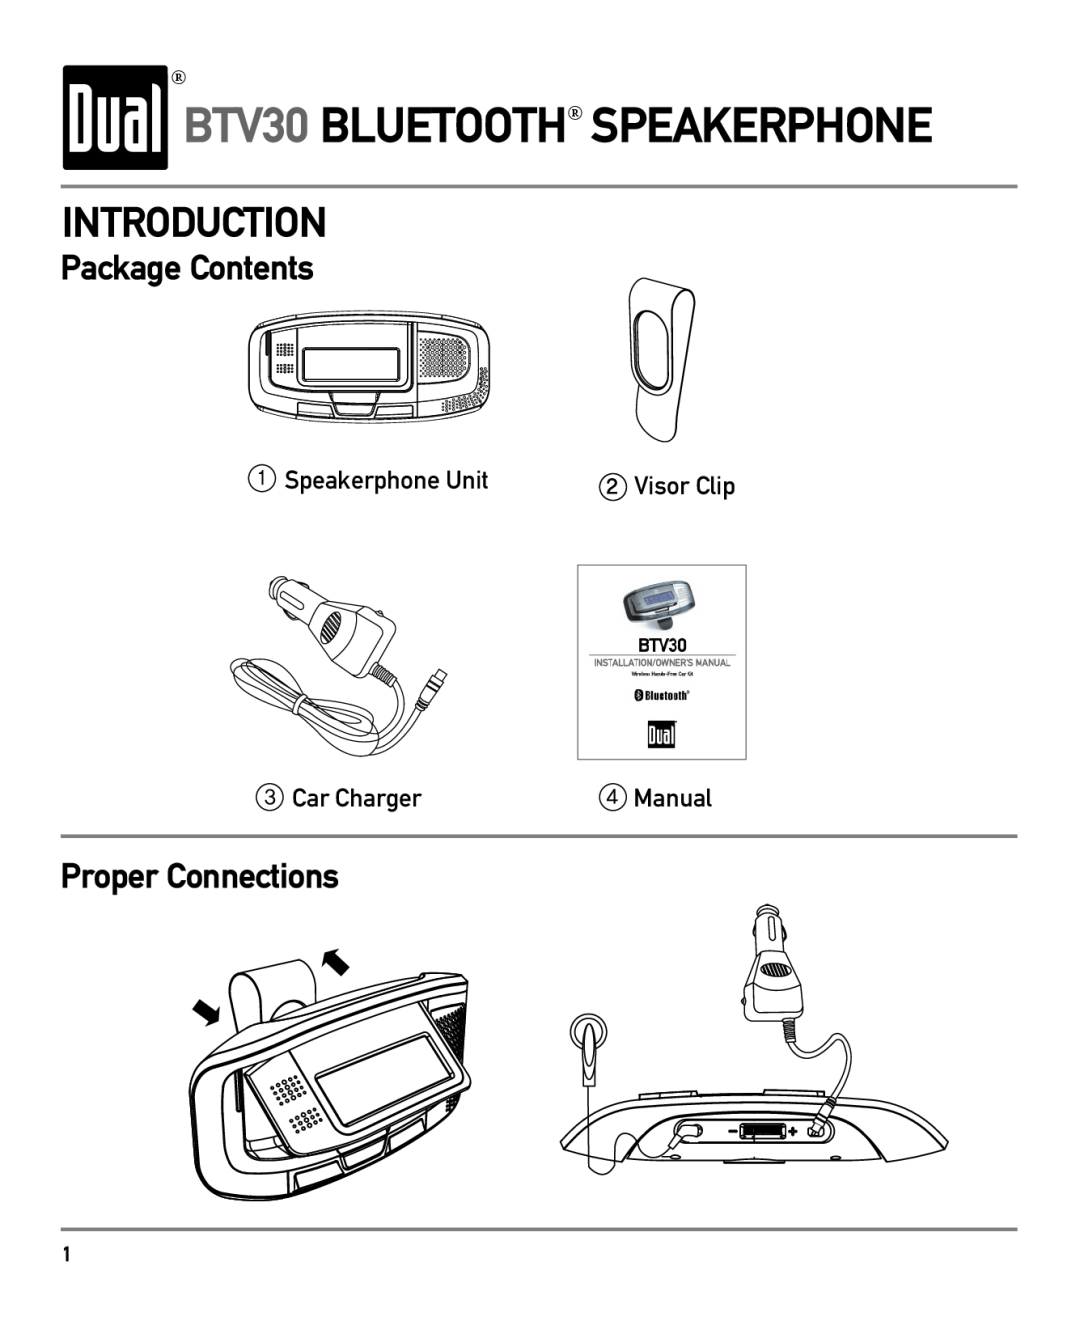 Dual owner manual Introduction, Package Contents, Proper Connections, BTV30 BLUETOOTH SPEAKERPHONE, Visor Clip, Manual 